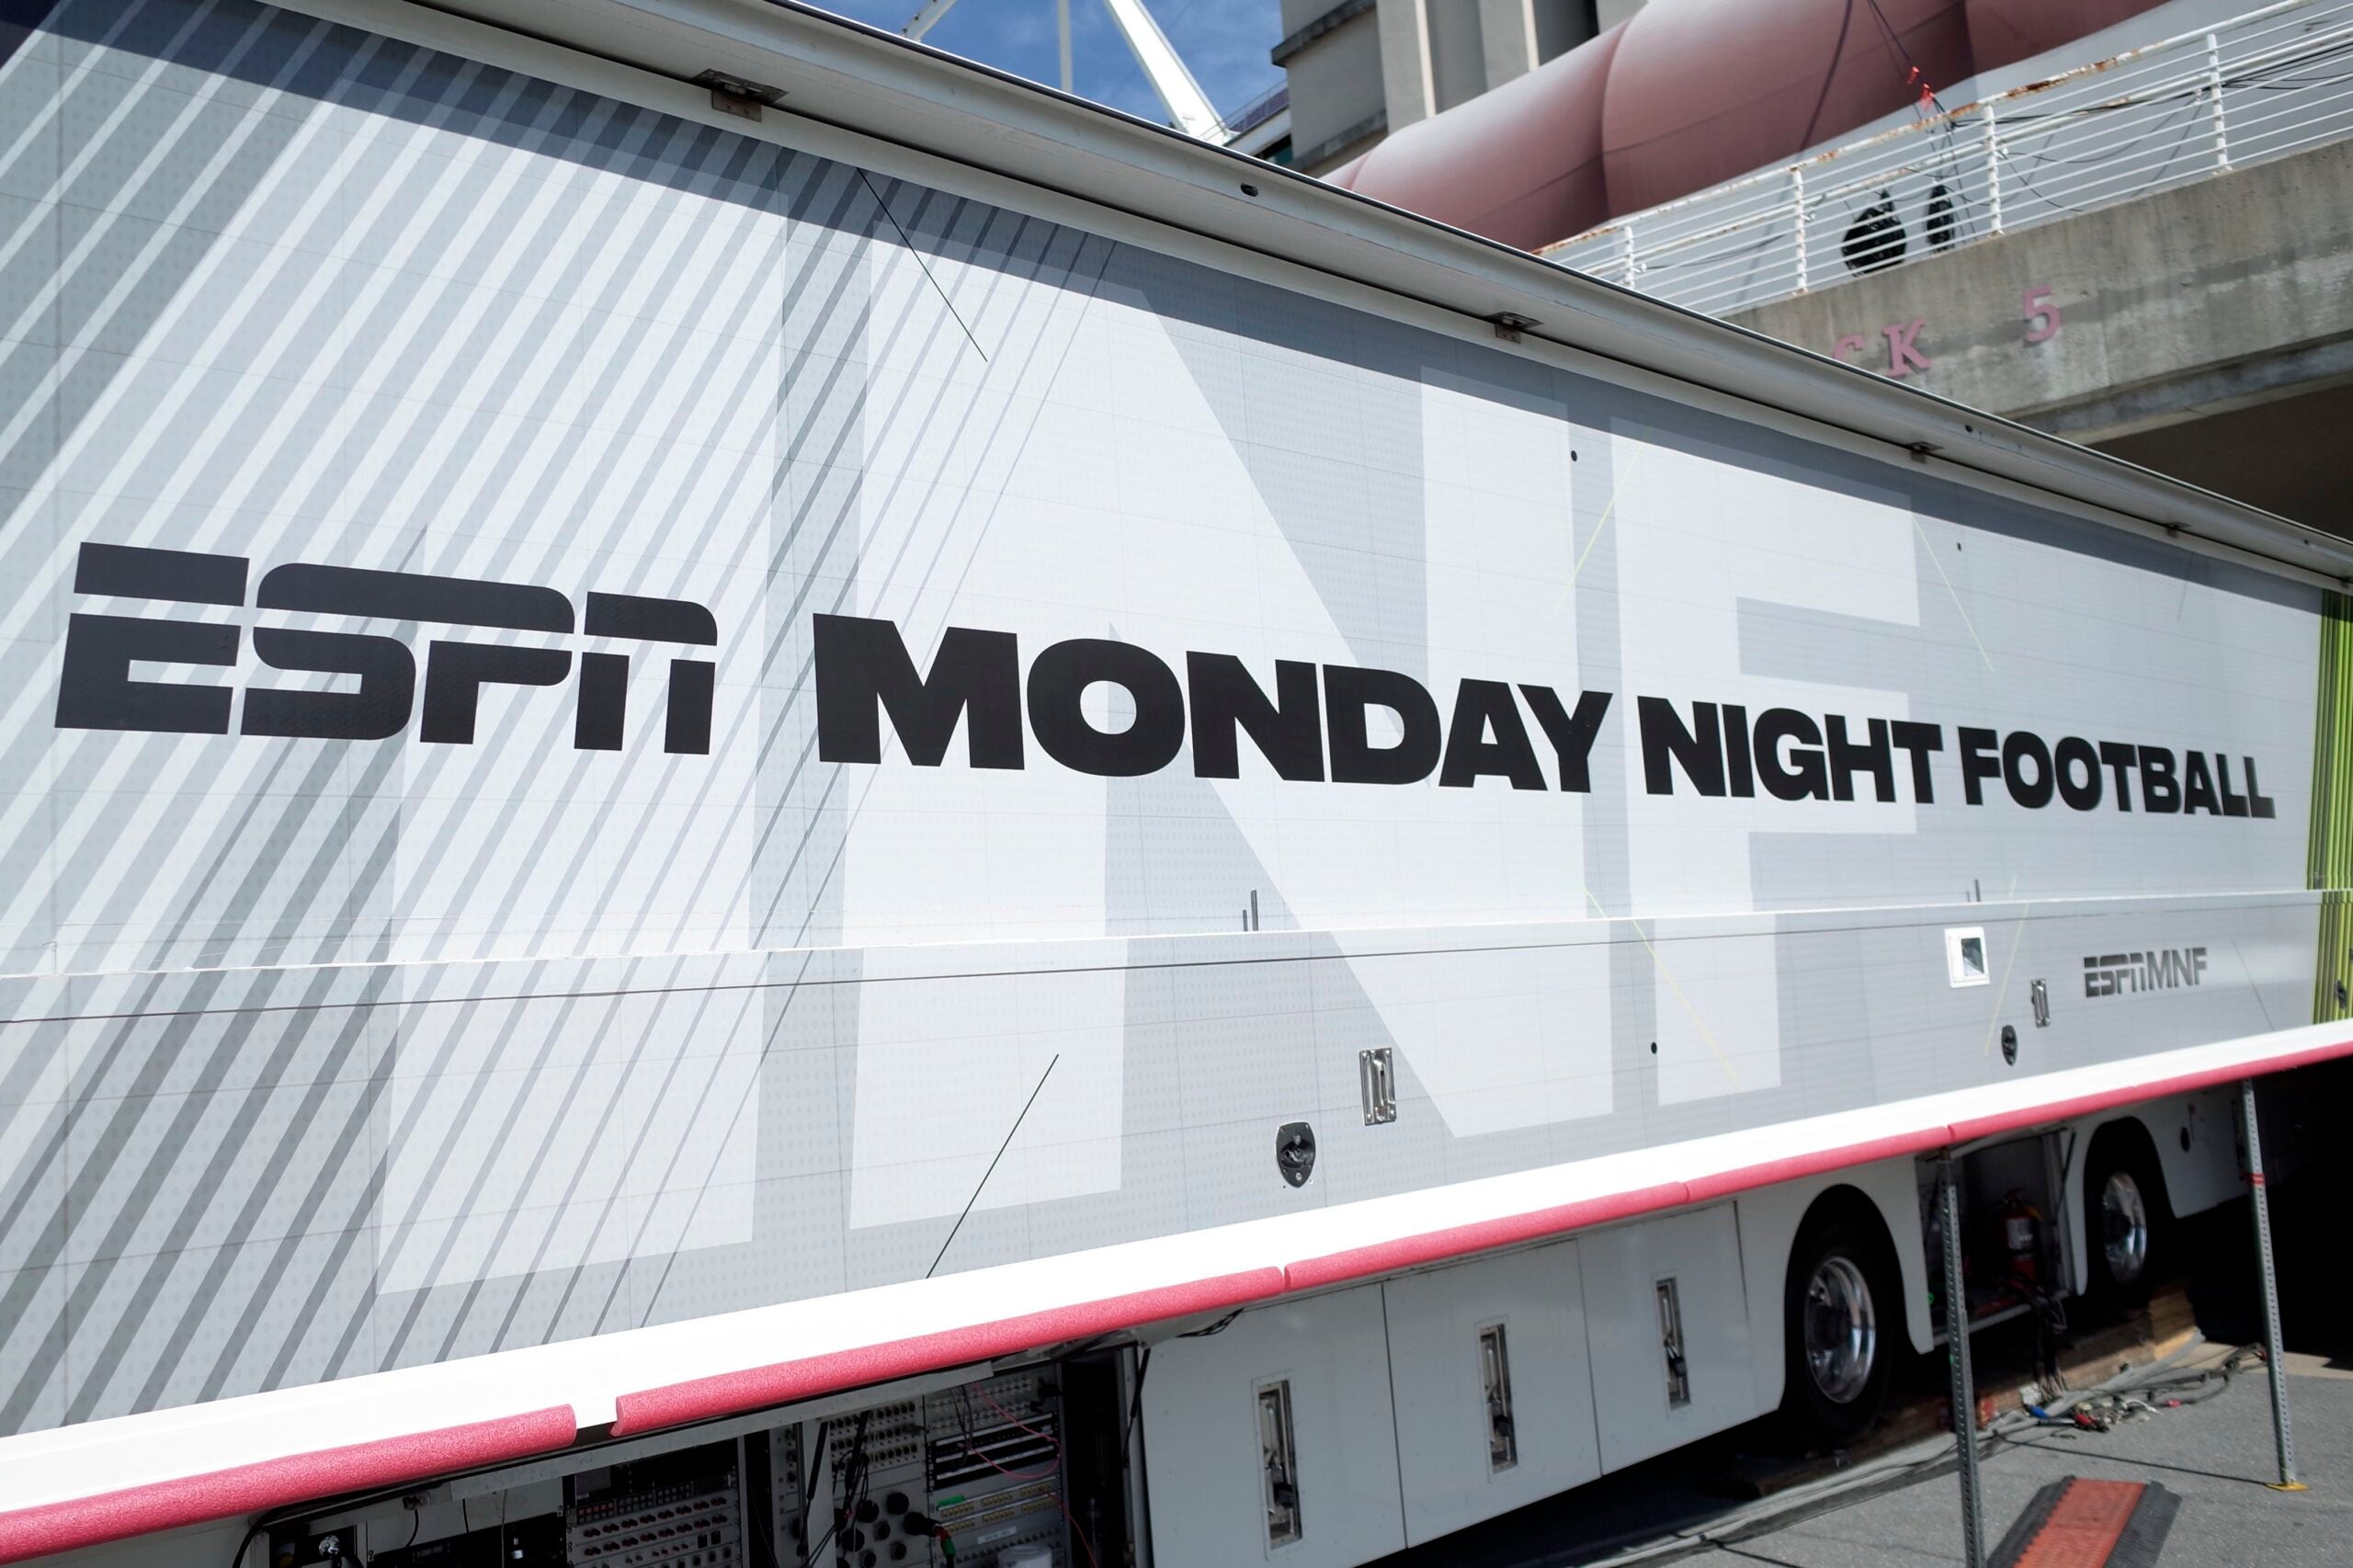 Steve Levy, Louis Riddick and Brian Griese named as new MNF crew - ESPN